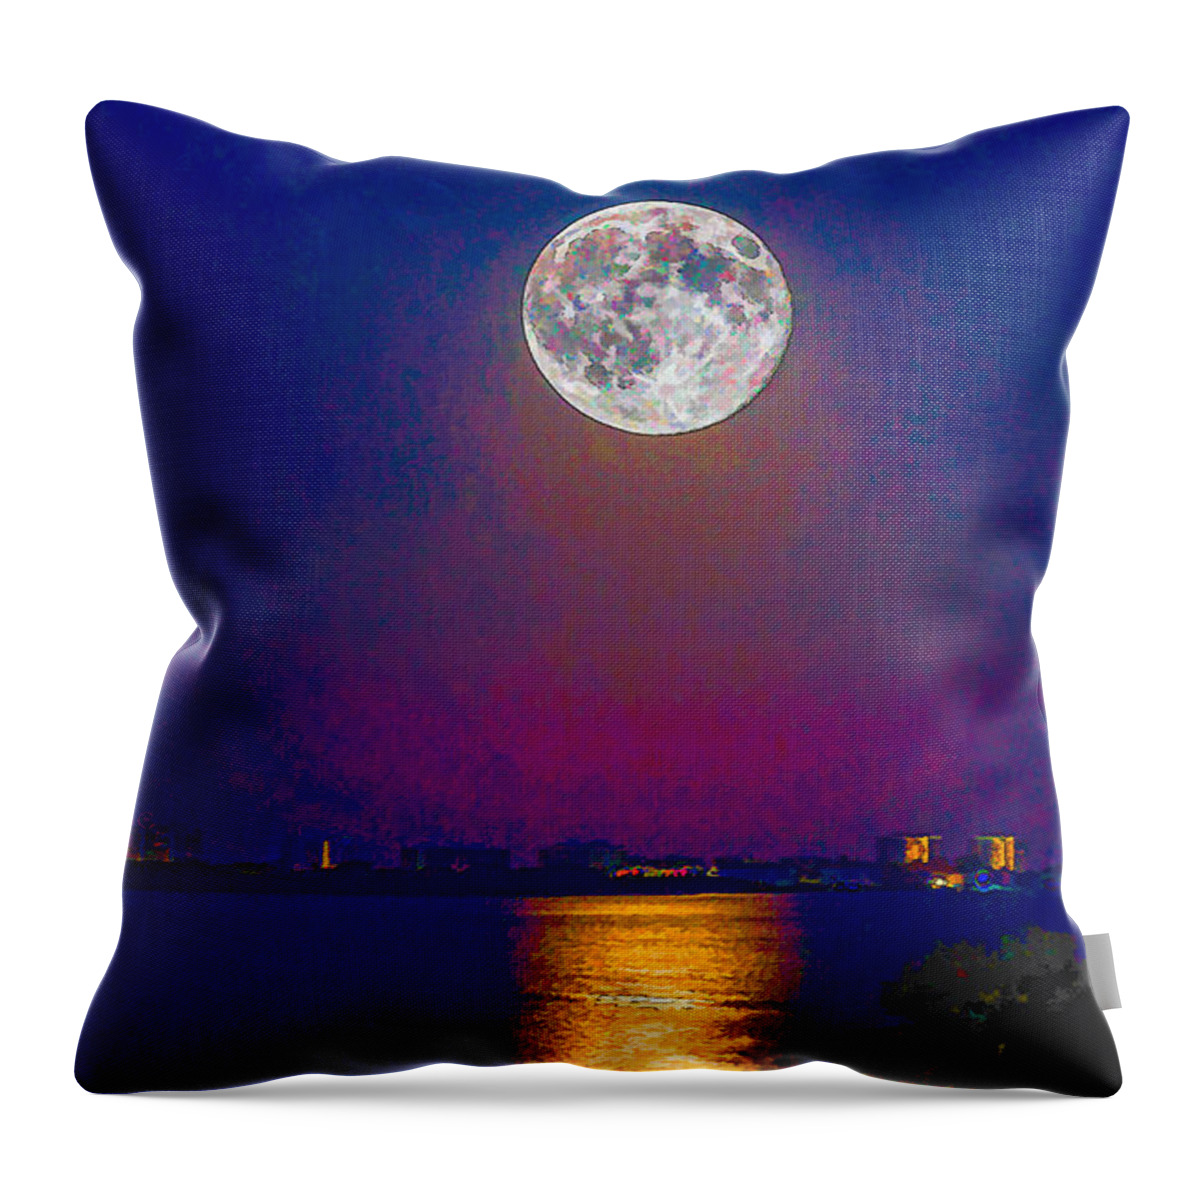 Moon Throw Pillow featuring the photograph Moonrise by Richard Goldman